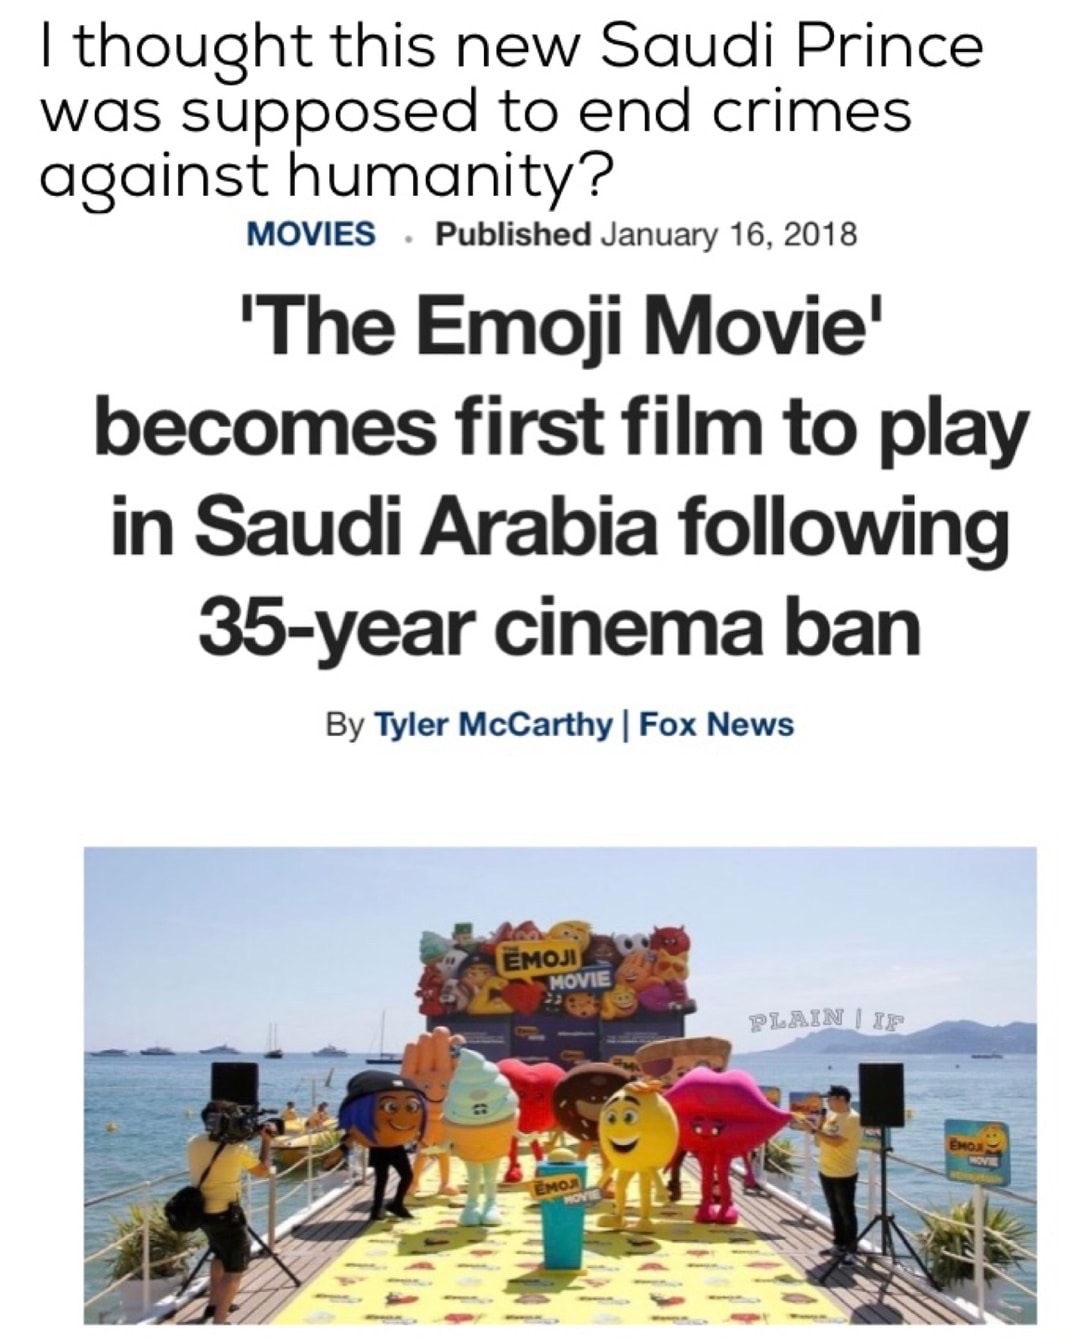 water resources - I thought this new Saudi Prince was supposed to end crimes against humanity? Movies Published 'The Emoji Movie' becomes first film to play in Saudi Arabia ing 35year cinema ban By Tyler McCarthy | Fox News Emoji Movie Plain | If Emo